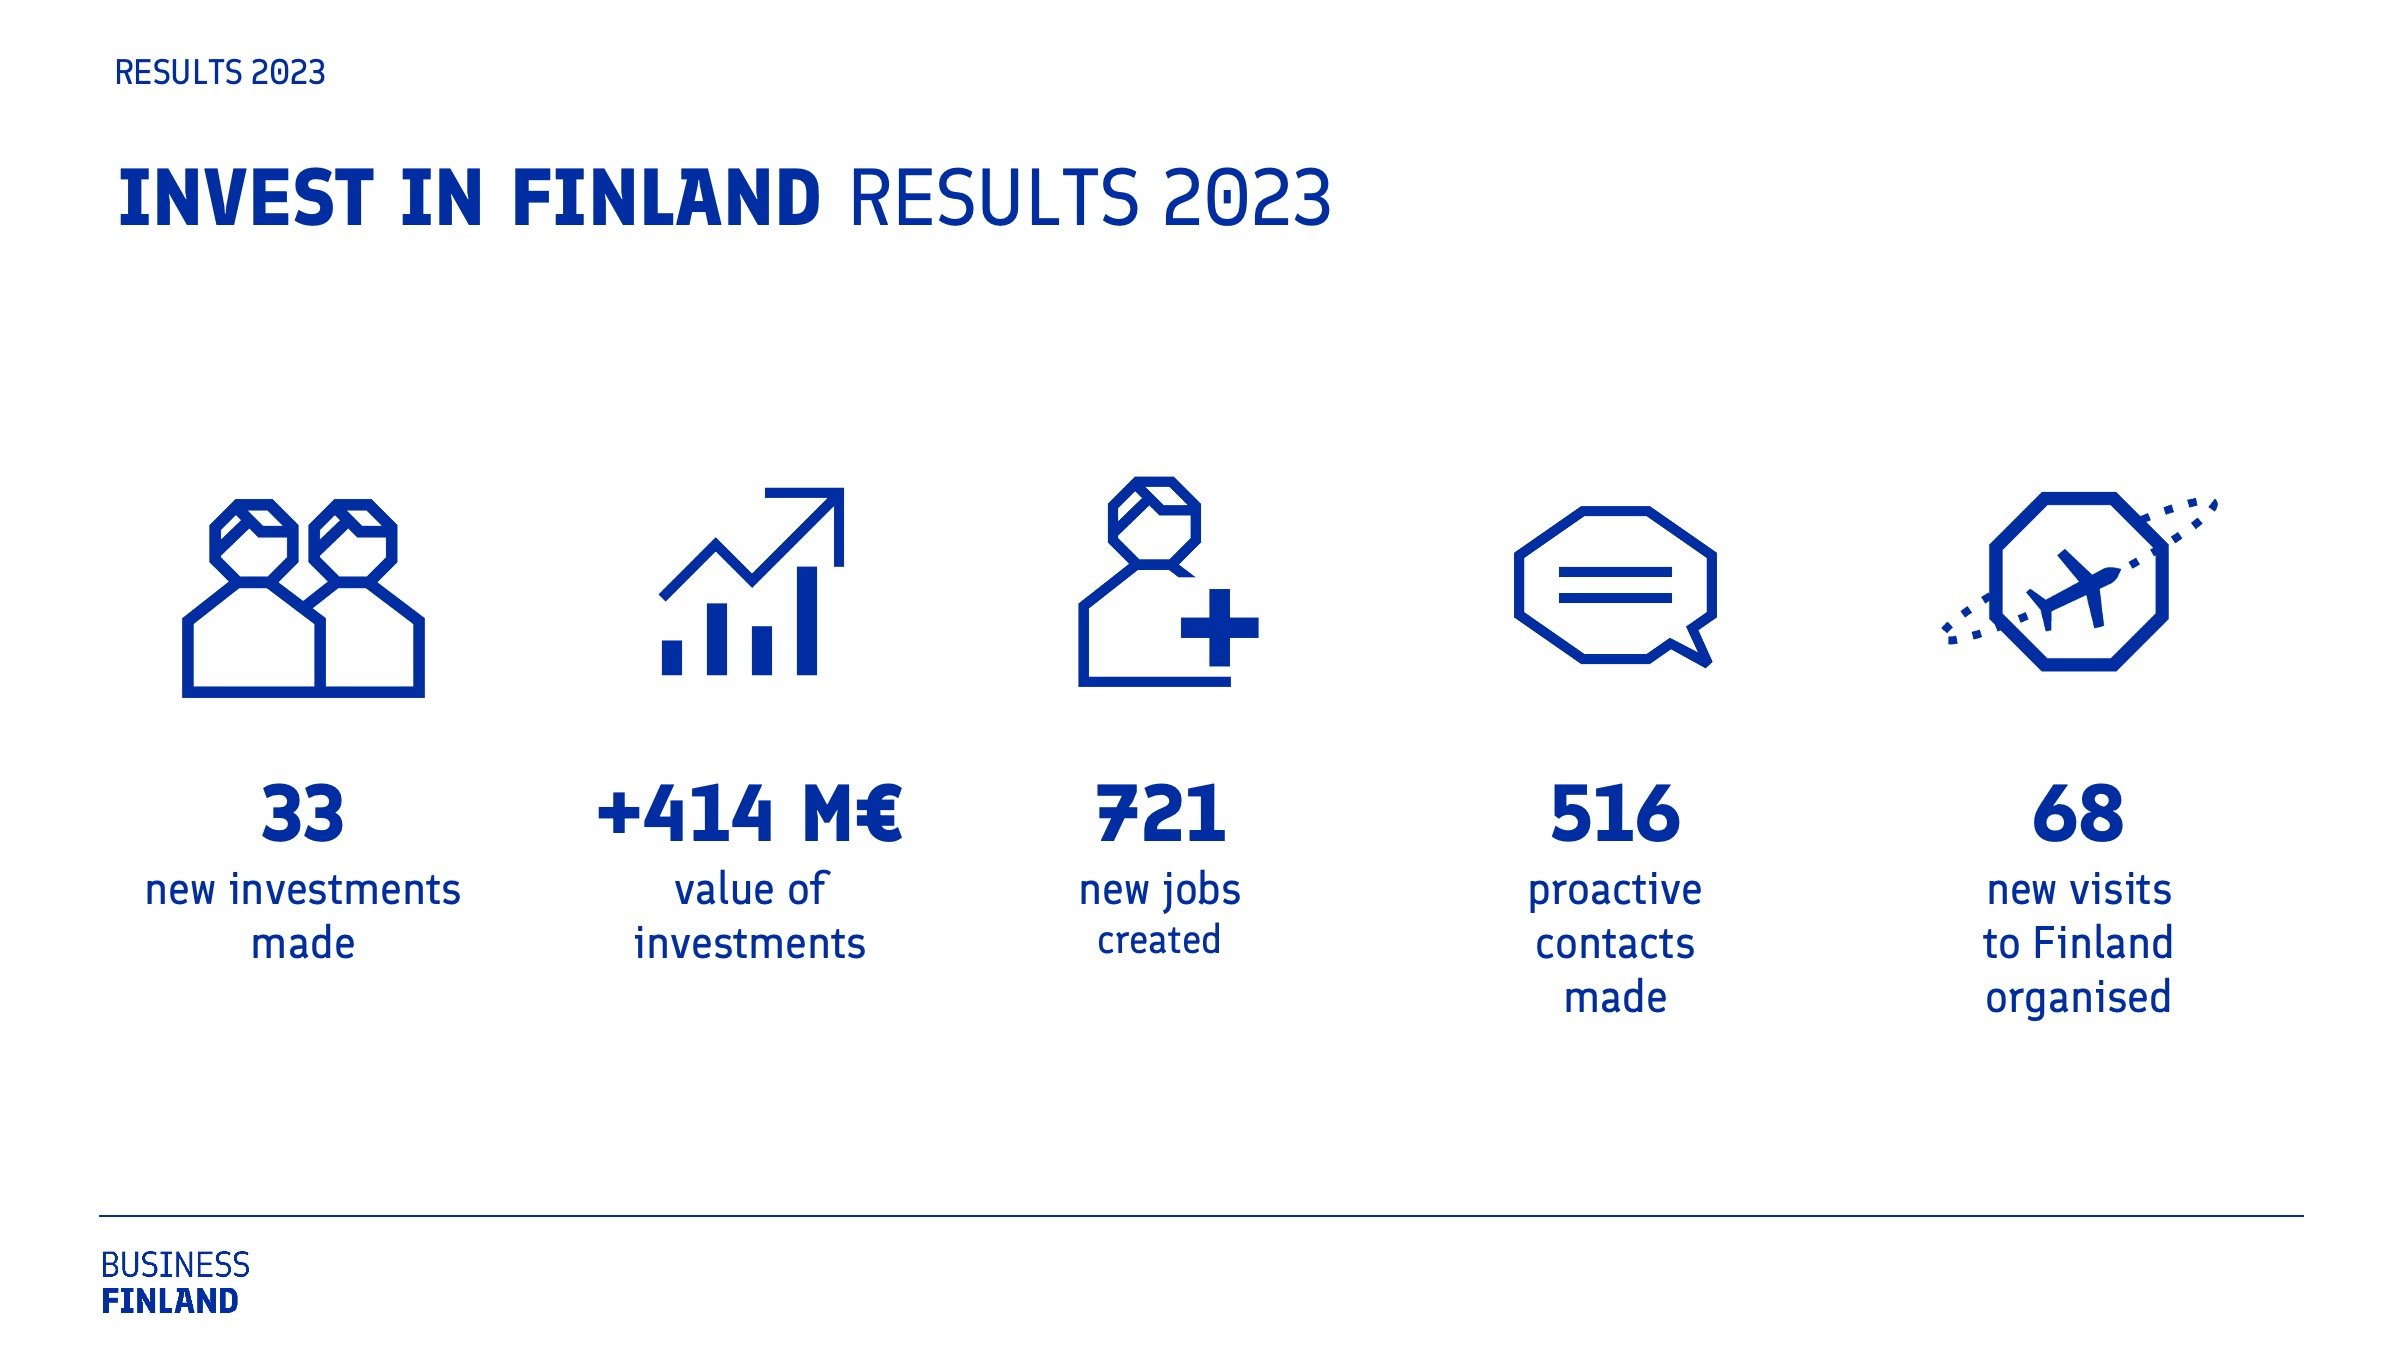 Invest in Finland team results 2023